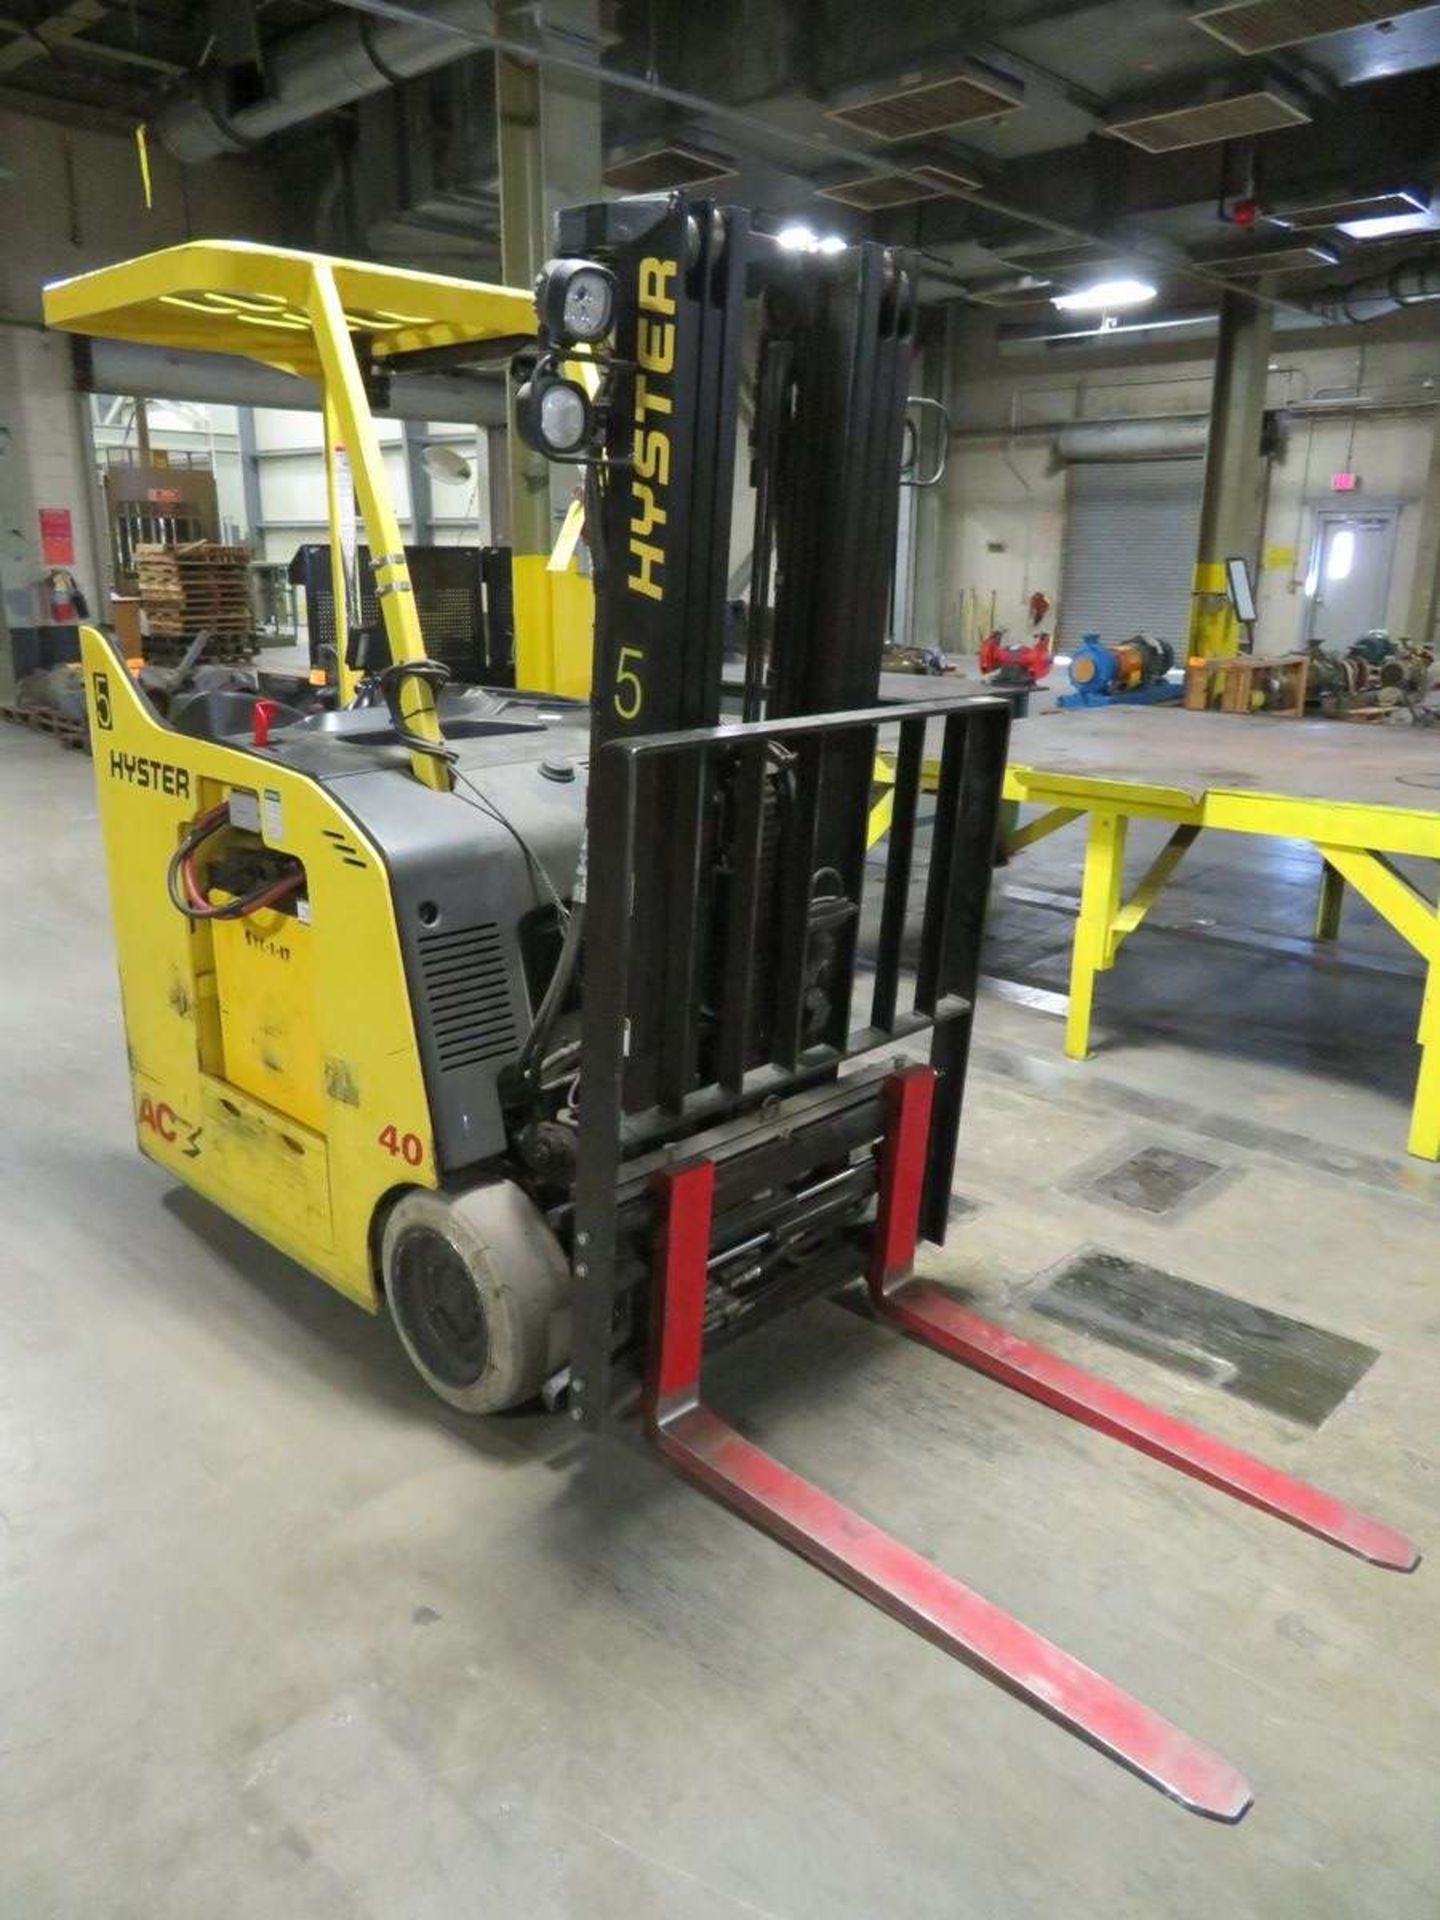 Hyster E40HSD2-21 36V Electric Stand-Up Fork Truck - Image 2 of 8